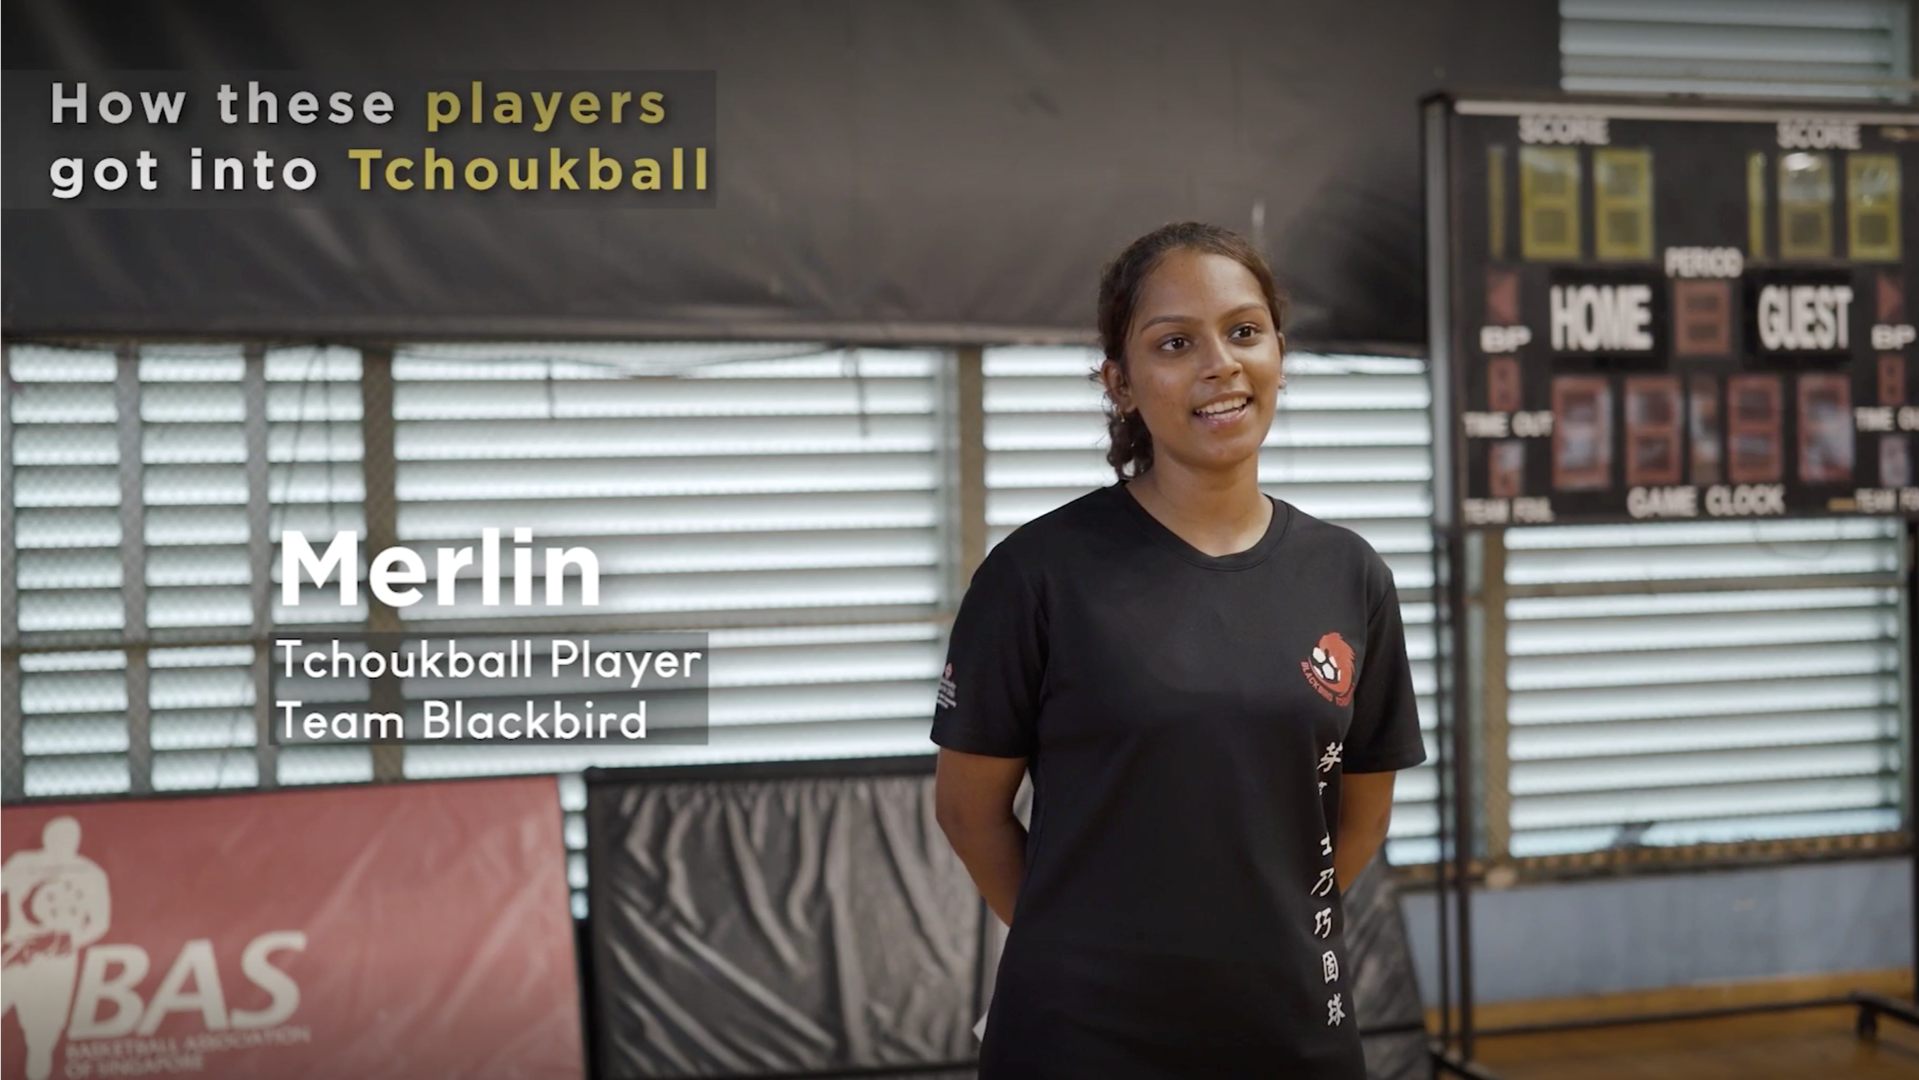 Ep 6 - How to get started in Tchoukball in Singapore